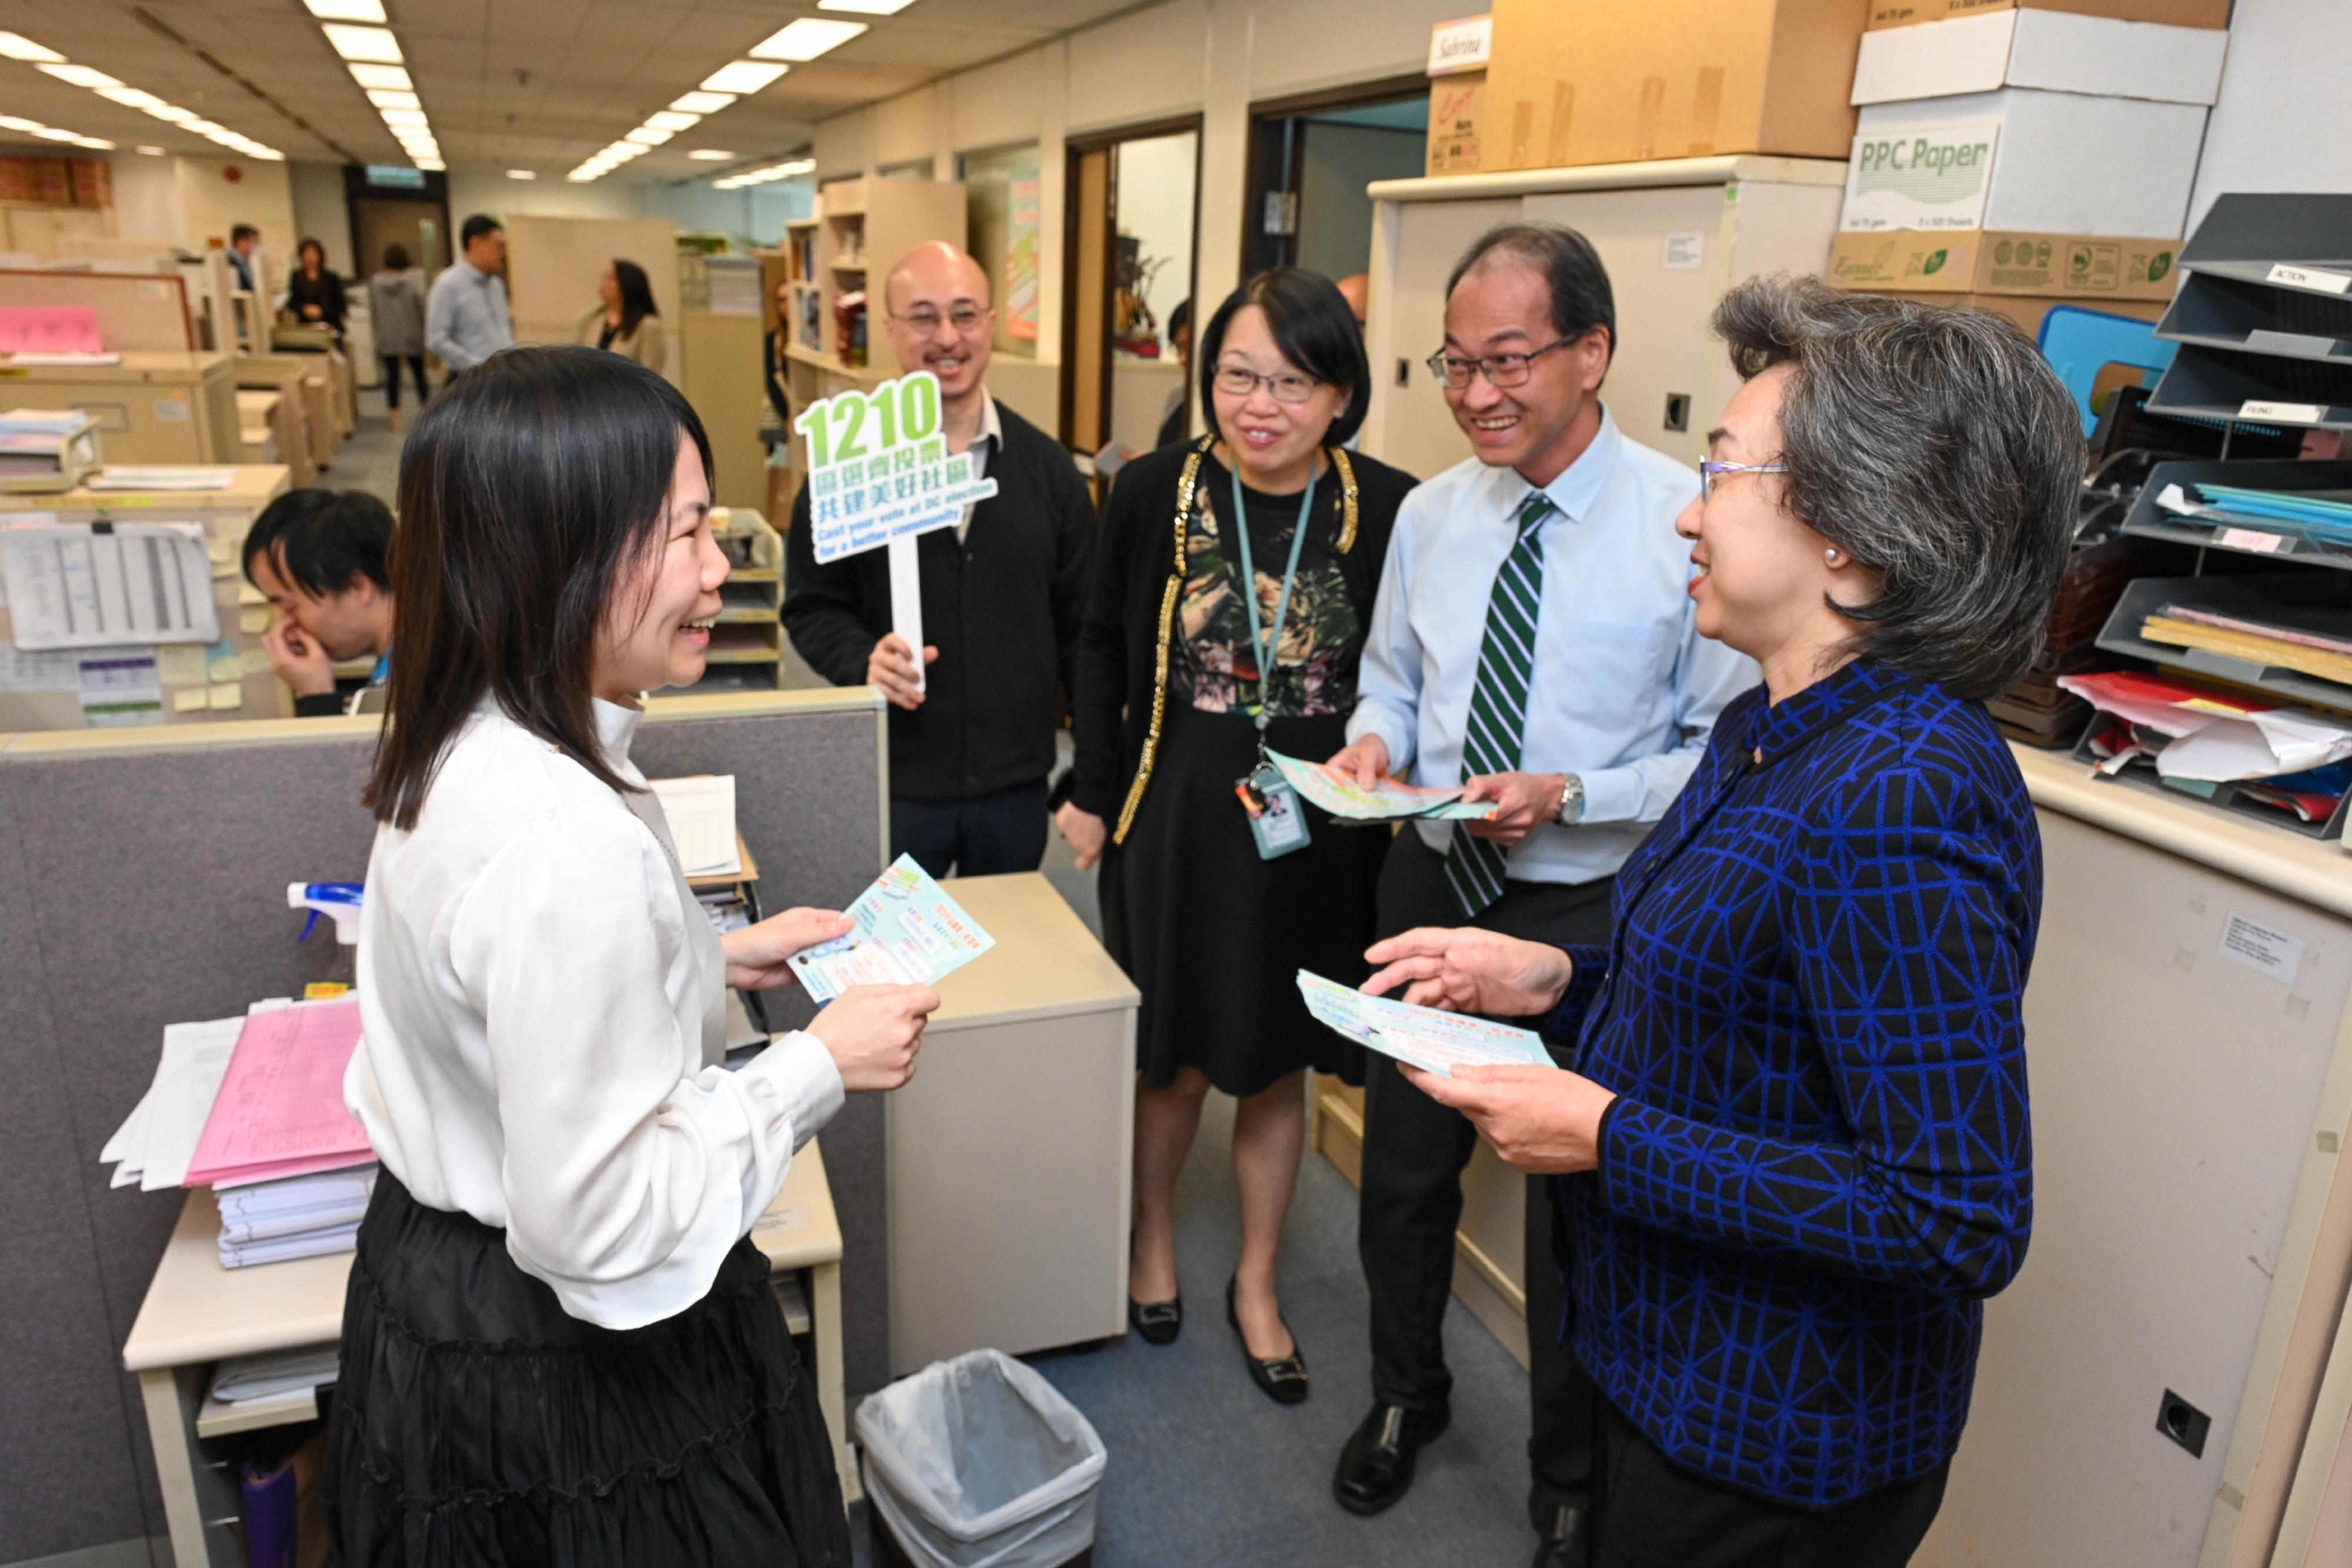 With only three days to go before the District Council (DC) election, the Secretary for the Civil Service, Mrs Ingrid Yeung, distributed promotional leaflets on the DC election to colleagues at the Official Languages Division of the Civil Service Bureau (CSB) today (December 7) to encourage them to cast their votes with their families and friends on December 10. Photo shows Mrs Yeung (first right); Deputy Secretary for the Civil Service Mrs Angelina Cheung (third right); and the Principal Official Languages Officer of the CSB, Mr Tin Kai-yin (second right), appealing to a colleague to cast her vote early on the polling day.